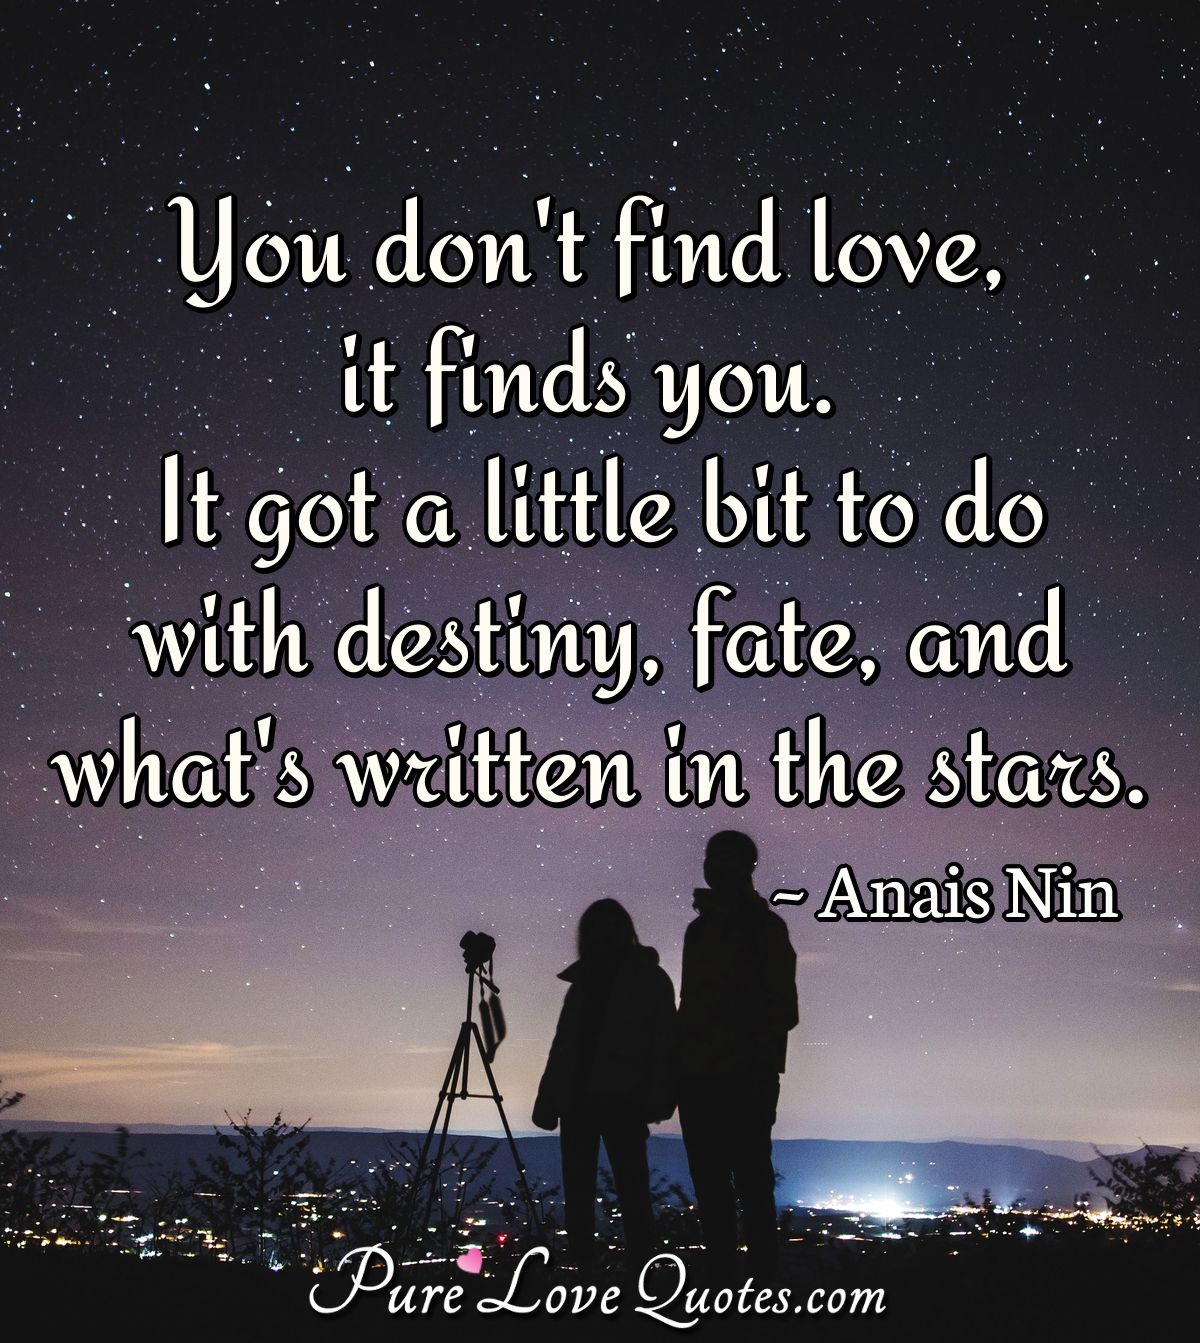 You don't find love, it finds you. It got a little bit to do with destiny, fate, and what's written in the stars. - Anais Nin